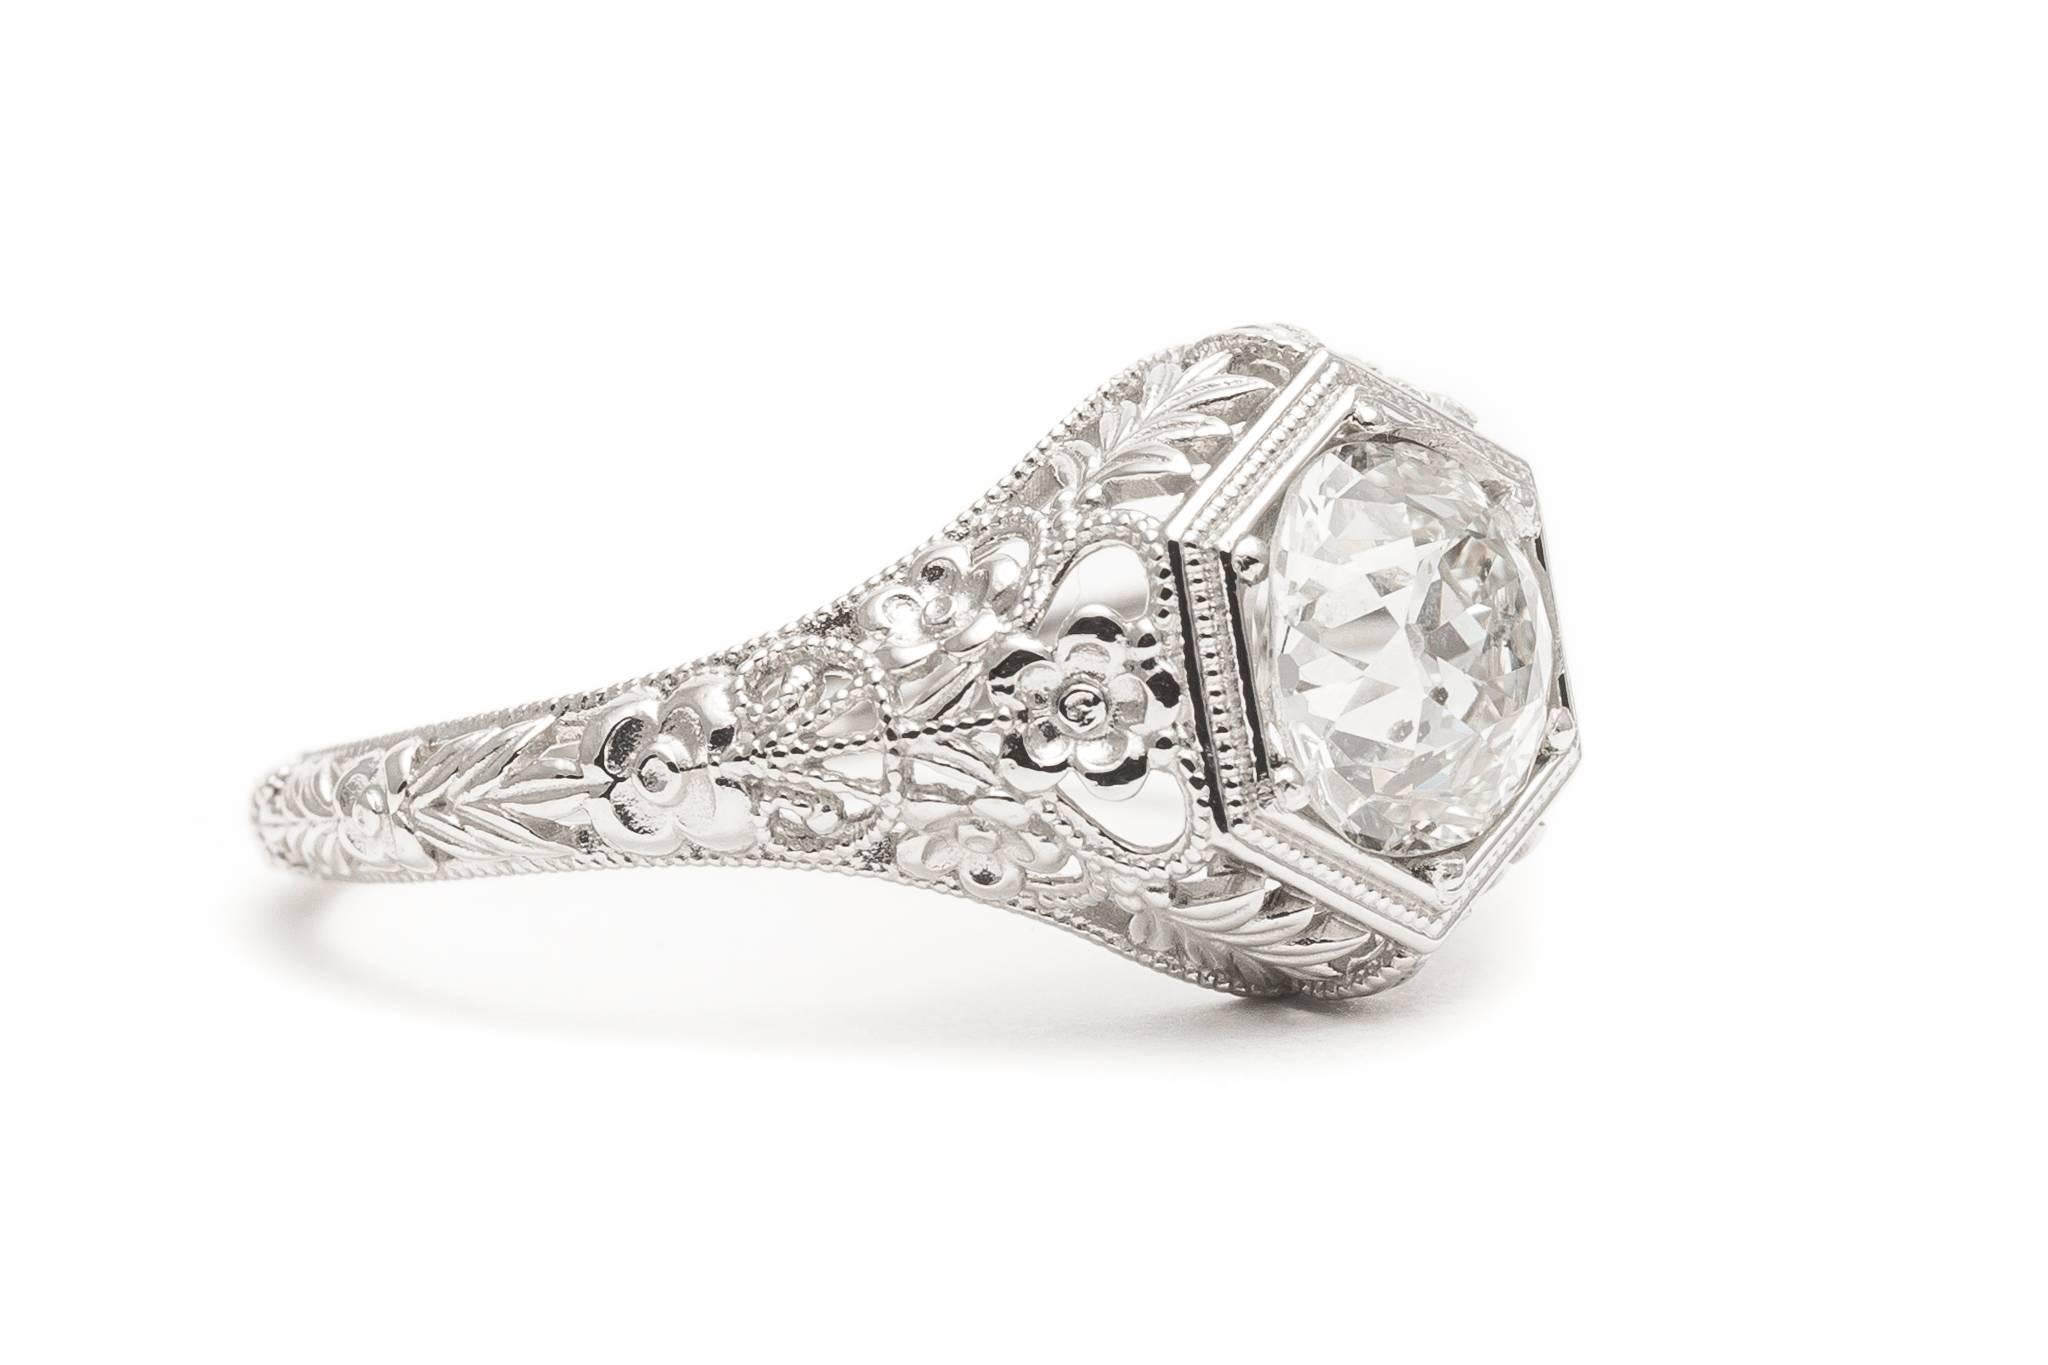 A beautiful handmade diamond filigree engagement ring in luxurious platinum. Centered by an antique European cut diamond, this ring features fantastic high quality floral motif filigree work throughout along with beautiful hand carving.

Grading as